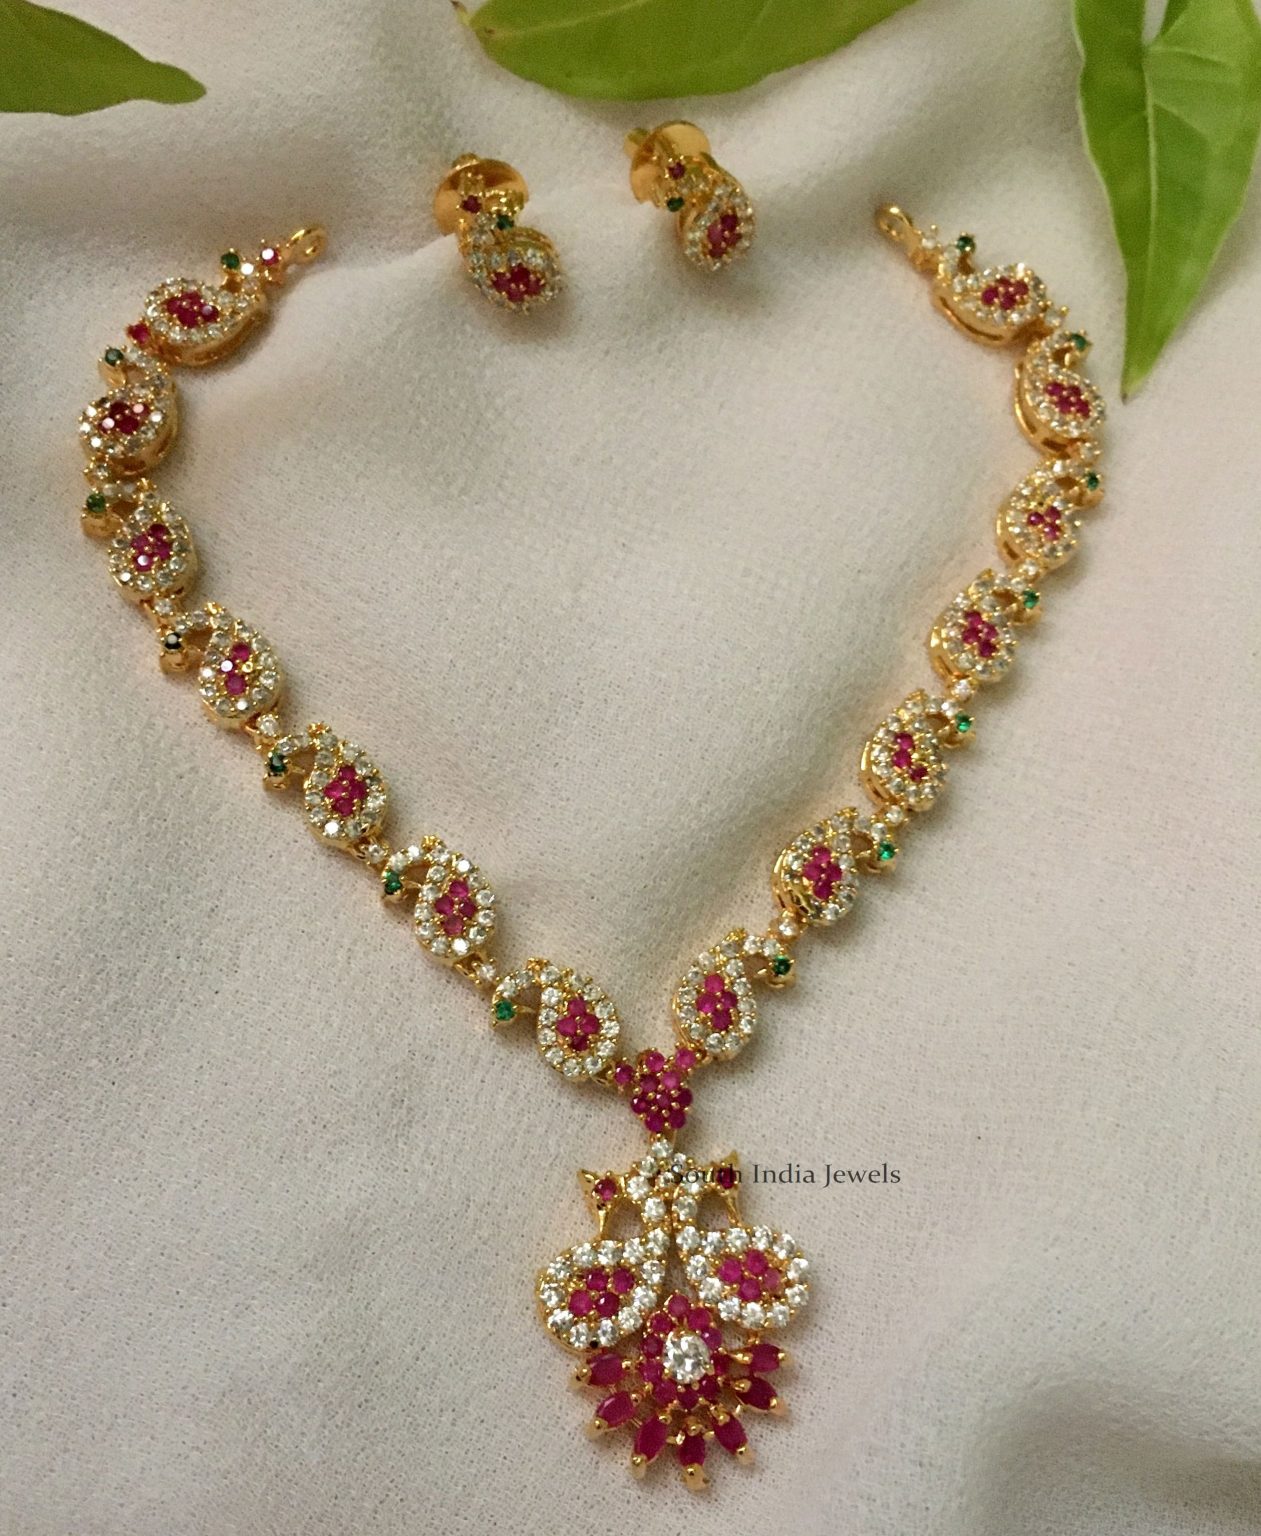 Elegant Peacock Design Ruby Necklace - South India Jewel